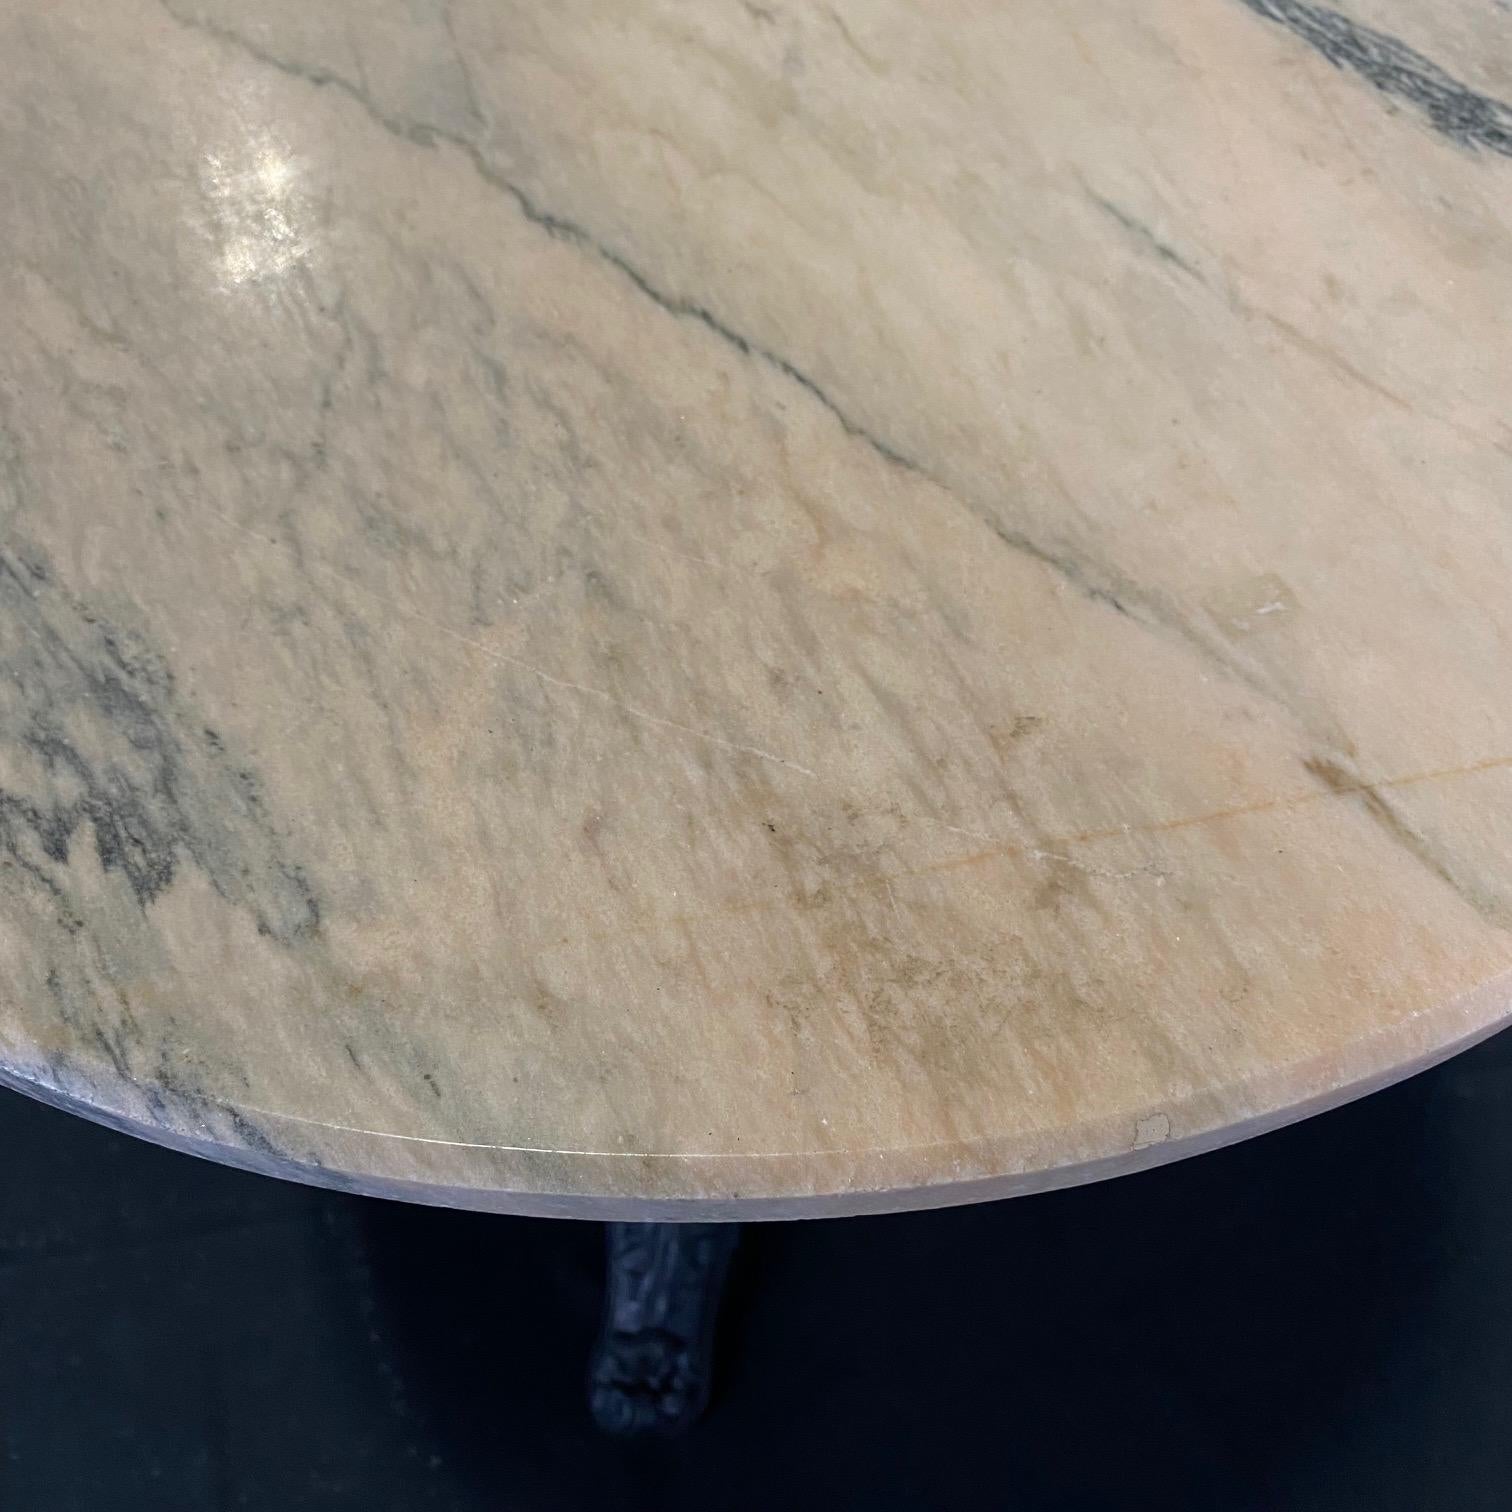 This French round bistro table from the turn of the twentieth century features an iron pedestal base and a really beautiful and substantial pinkish white marble top with gray veining. The marble joins the base with four arm supports. The base is